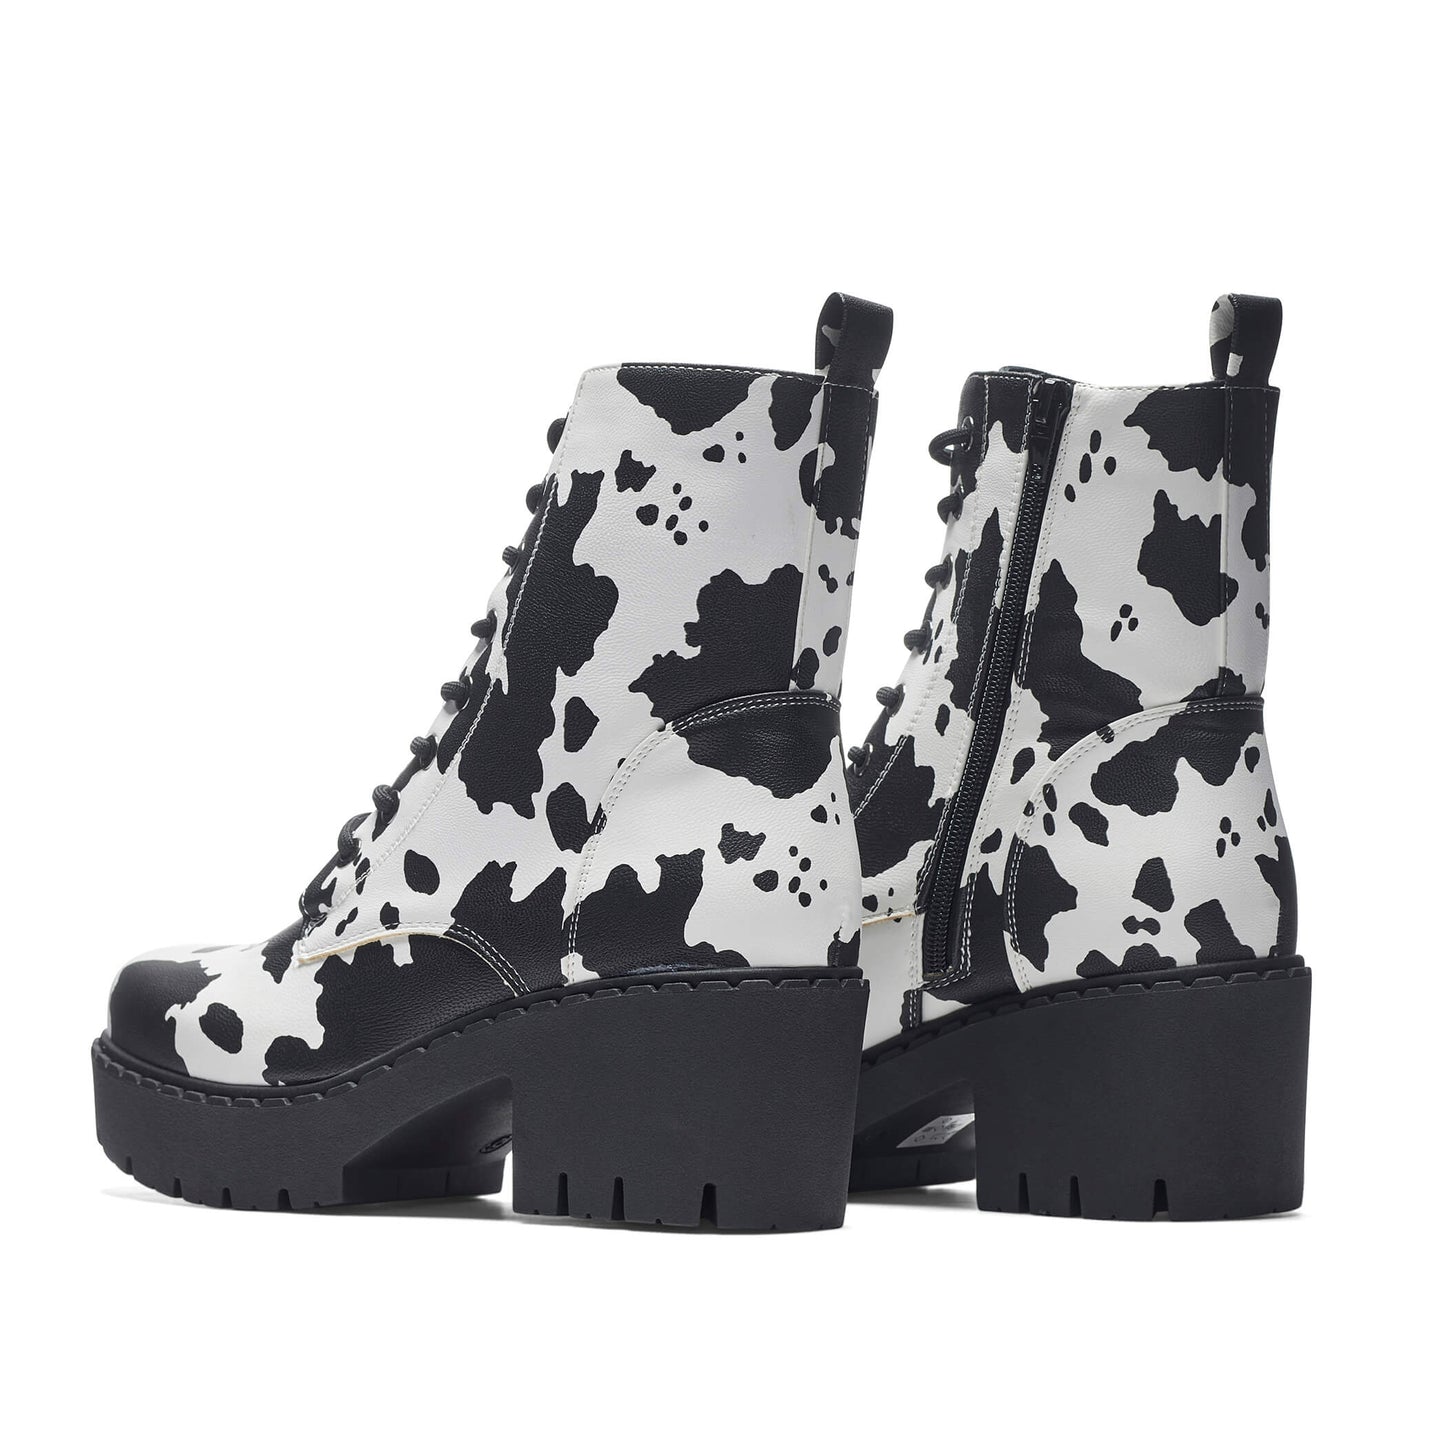 Daisy Cow Print Switch Lace Up Boots - Ankle Boots - KOI Footwear - Black - Back Side View